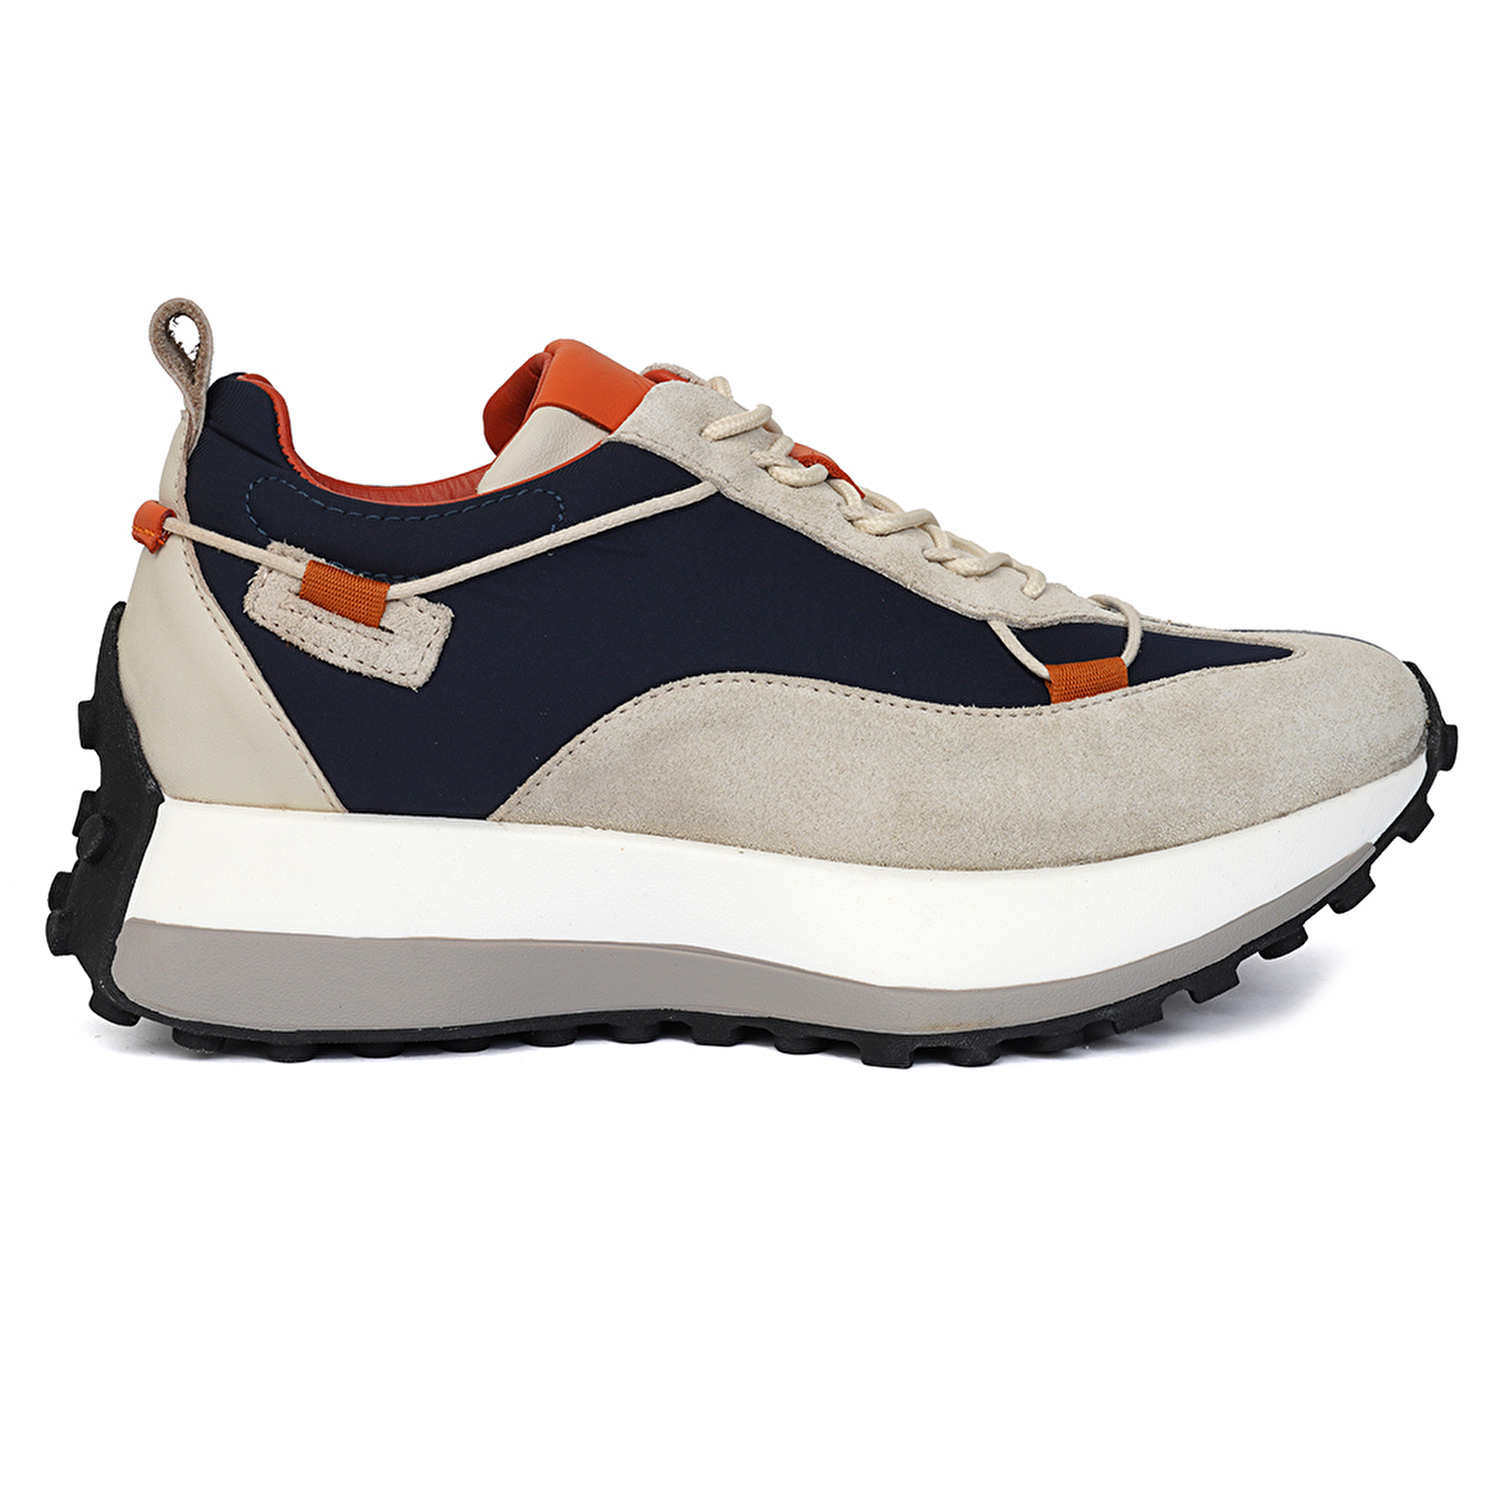 Mixed Fabric Colorful Sneakers Bone-Navy